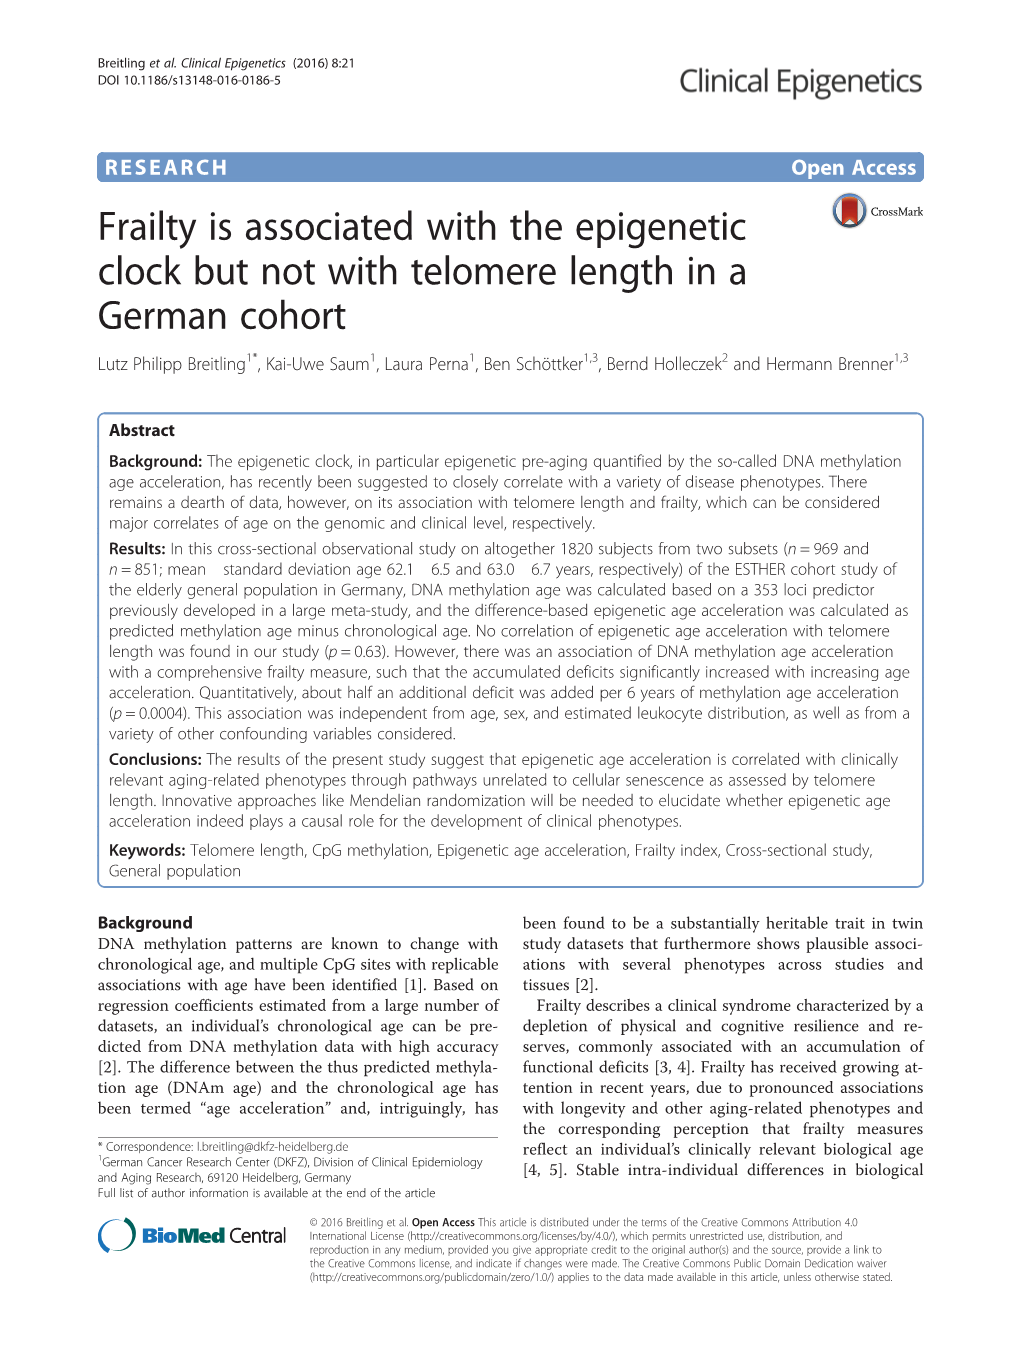 Frailty Is Associated with the Epigenetic Clock but Not With